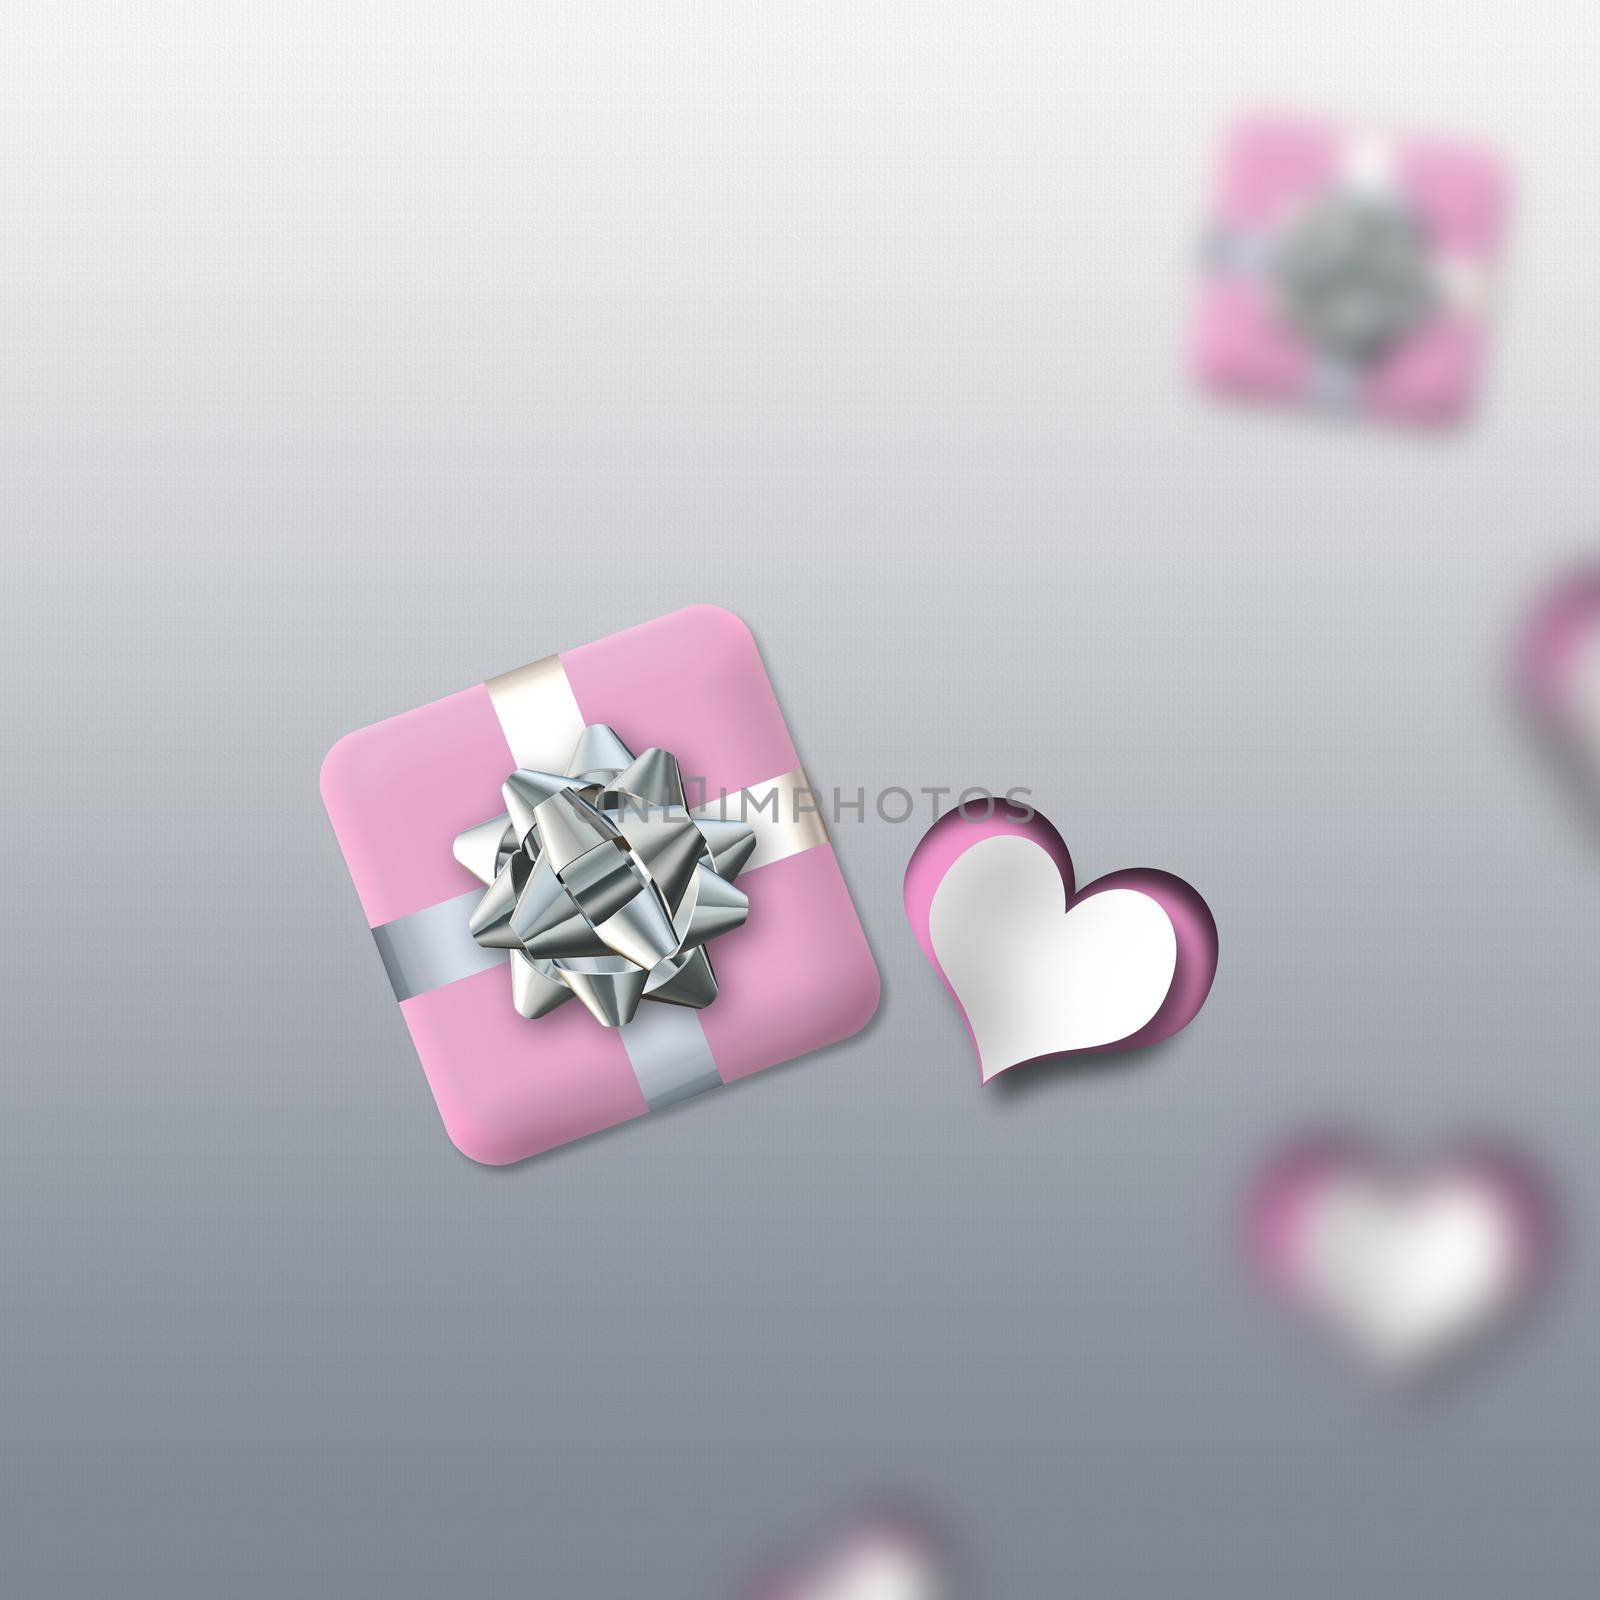 Elegant love card with pink hearts by NelliPolk